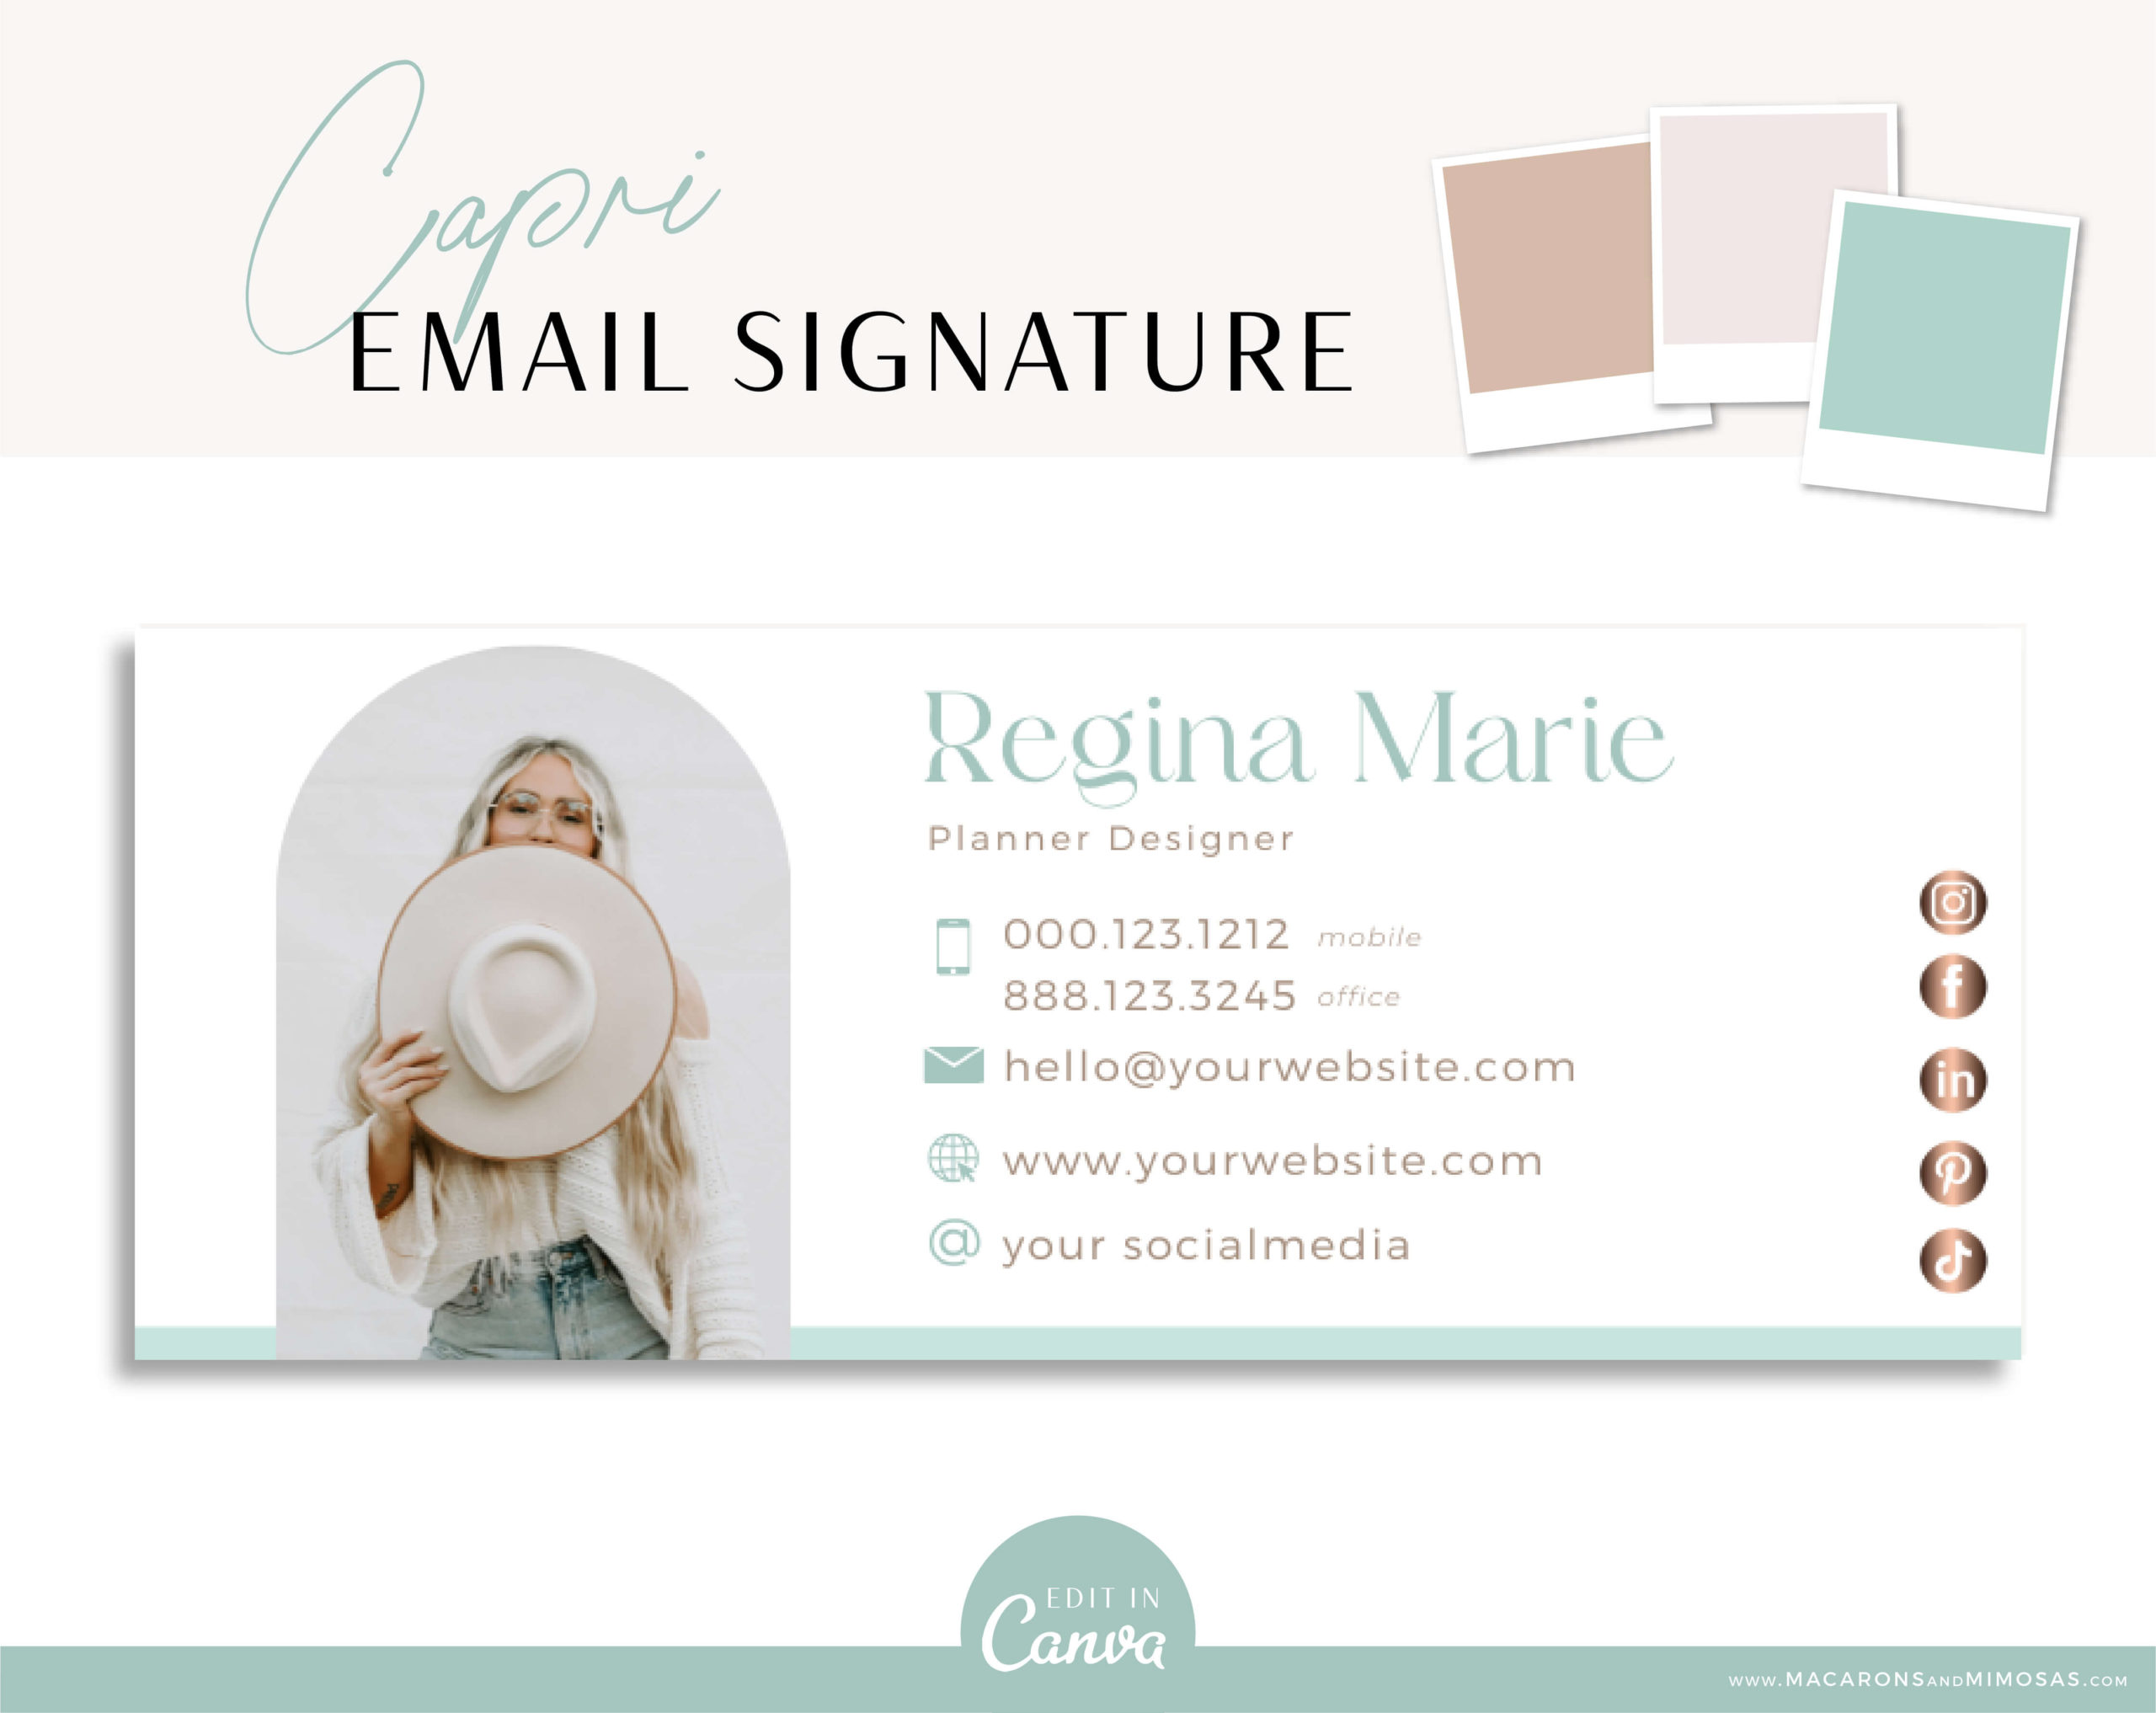 Pretty Blue Email Signature Template Logo, Best Seller Marketing Tool, Professional Real Estate Picture Signature, Realtor Gmail Design